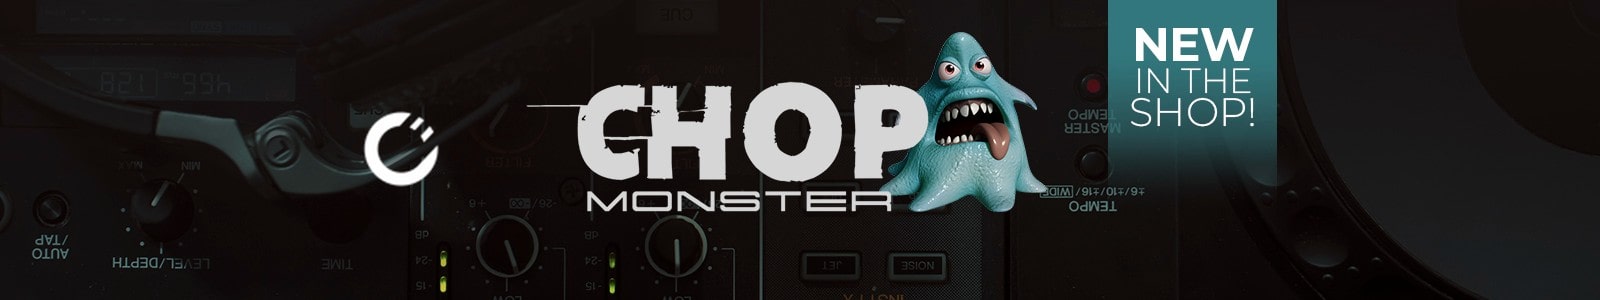 Chop Monster by Chop Audio